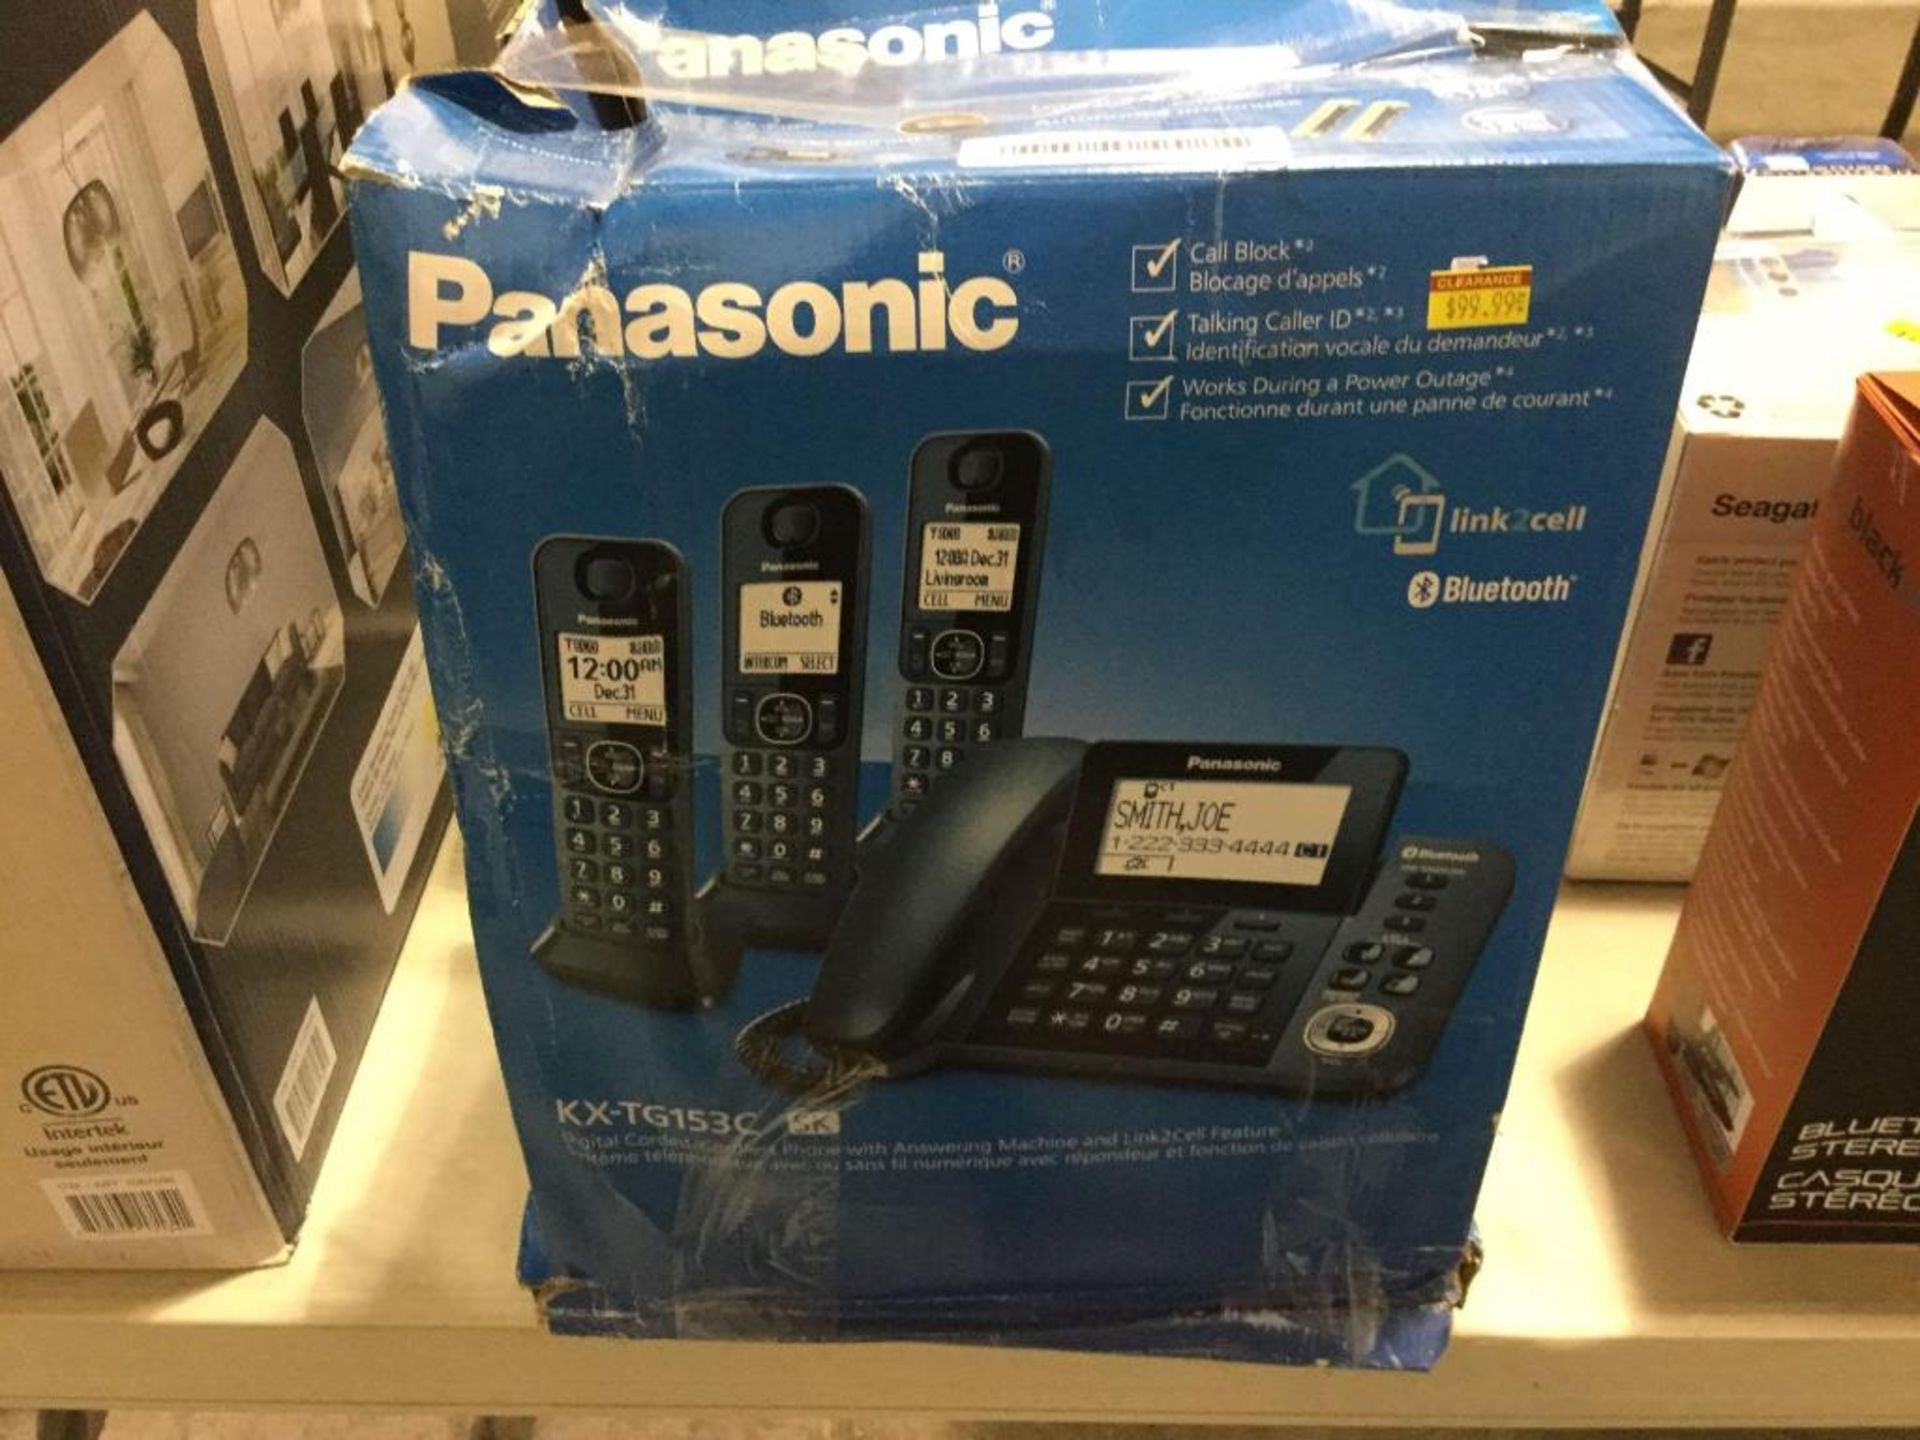 Panasonic KX-TG153C Digital Cordless Connected Phones with Answering Machine